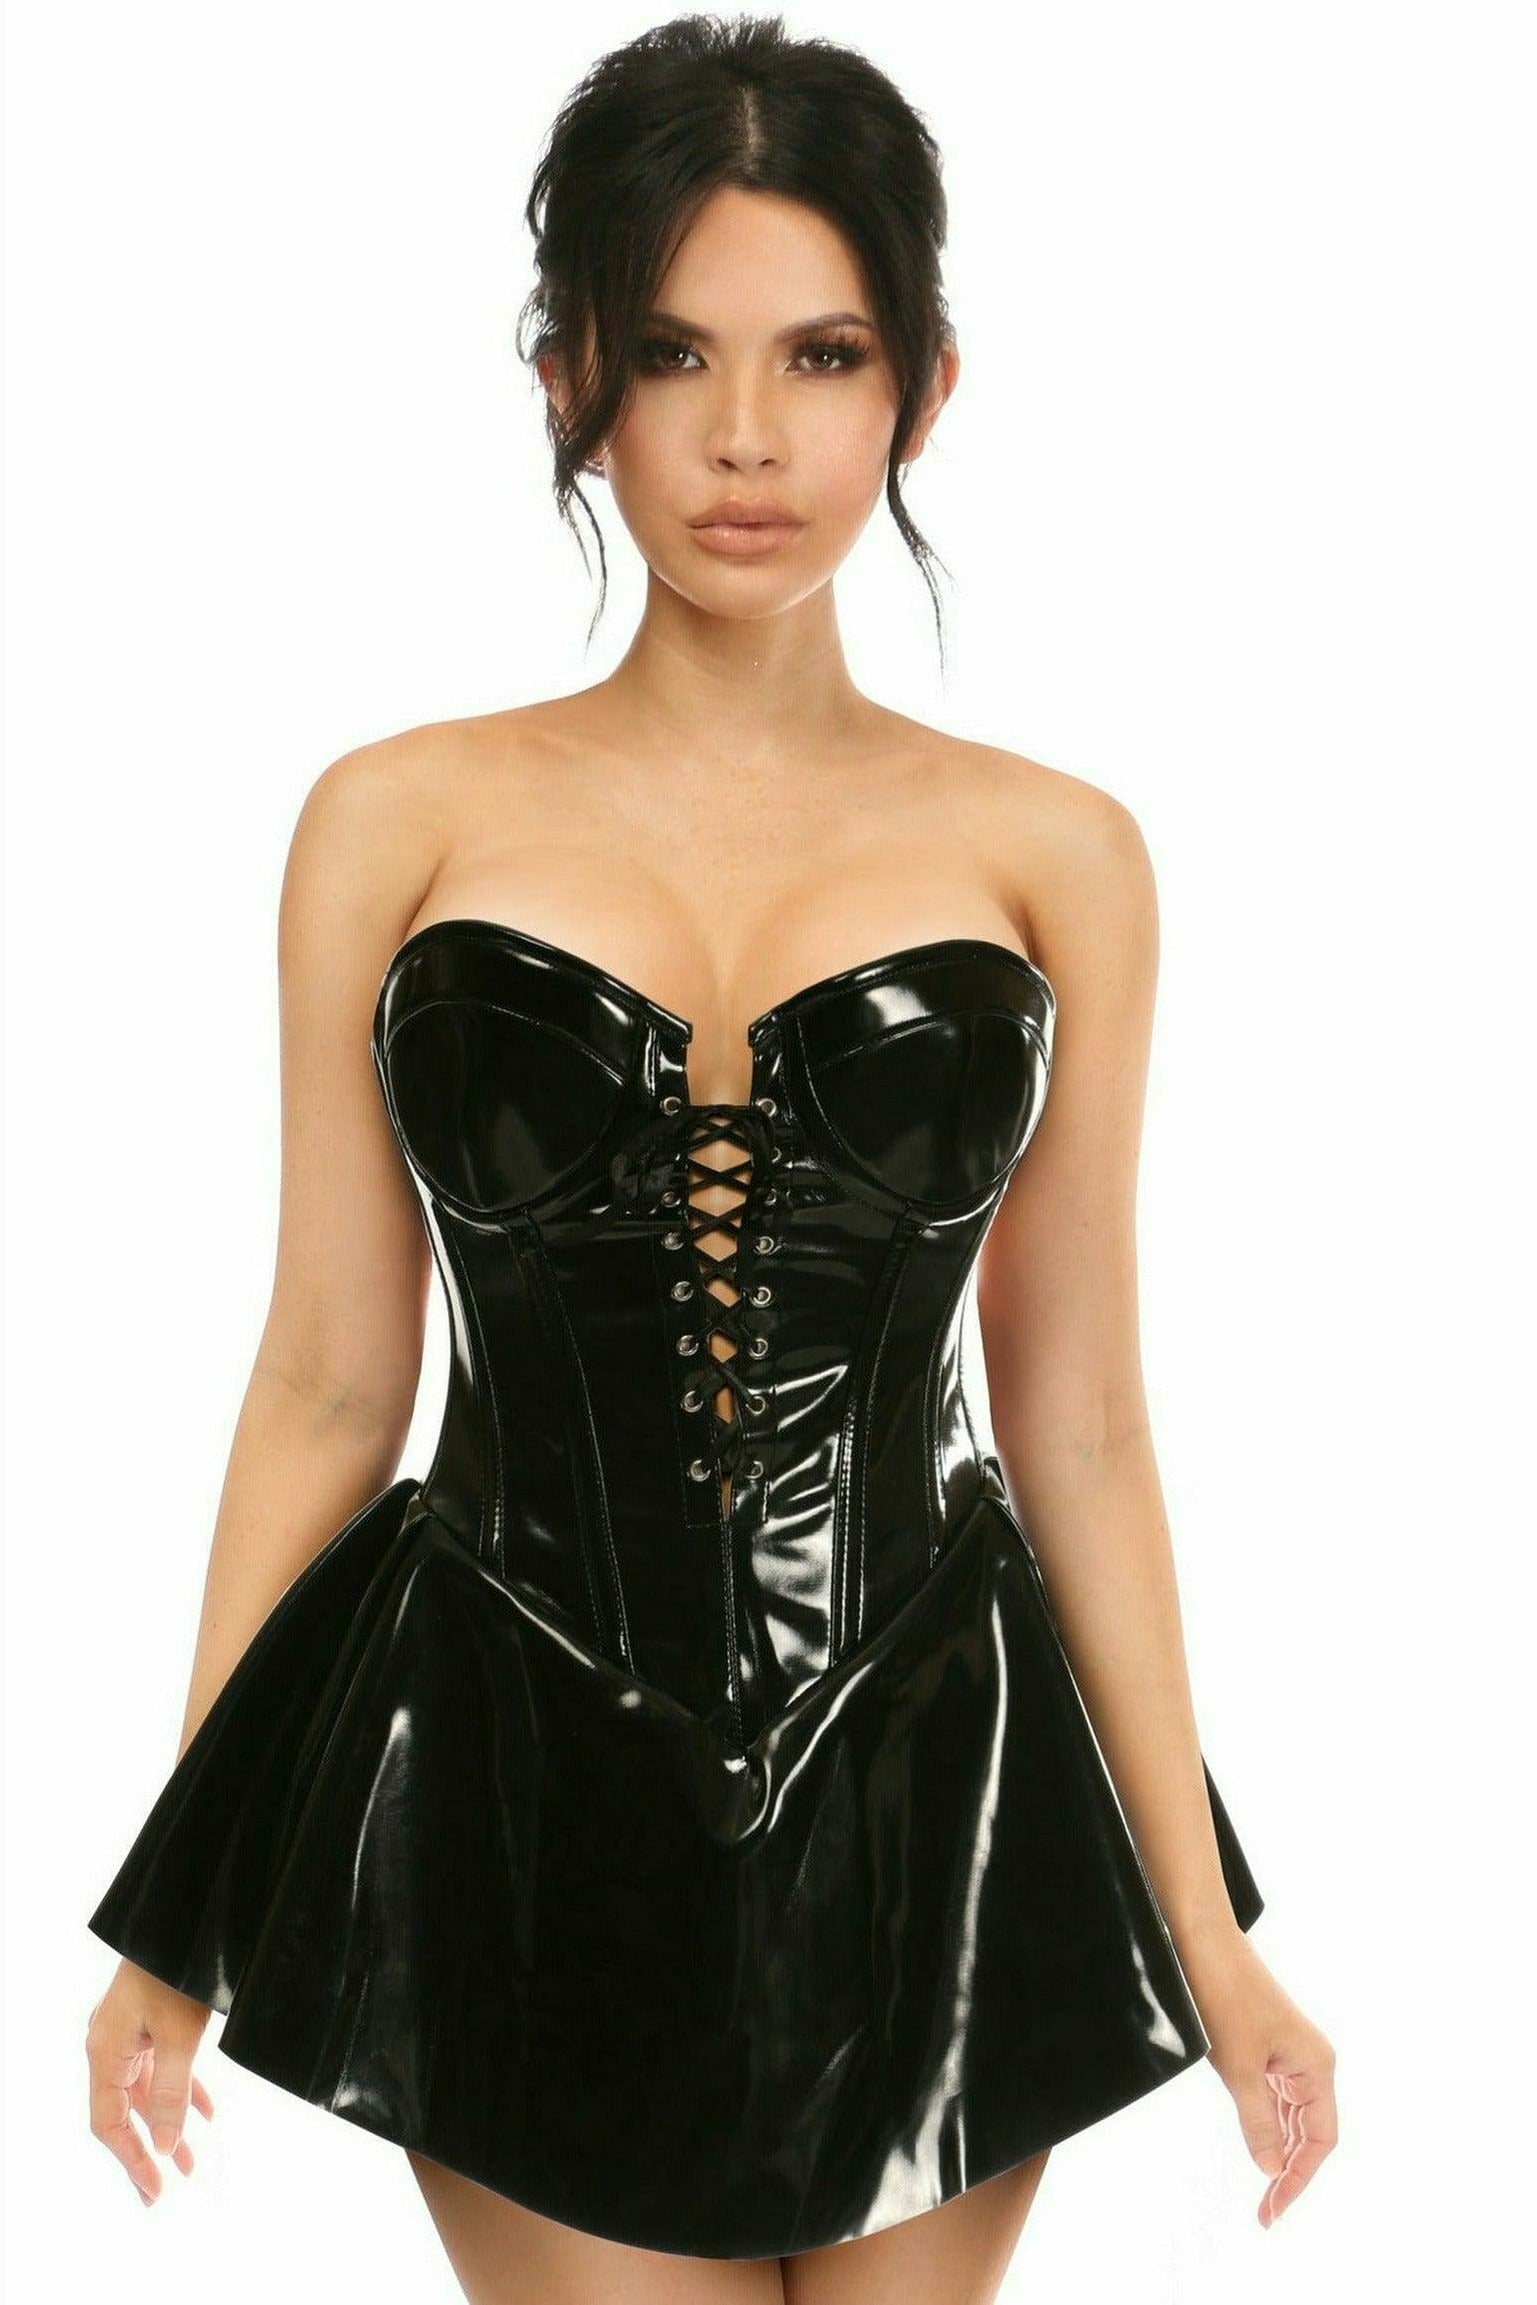 Top Drawer Black Patent Steel Boned Corseted Dress - Daisy Corsets